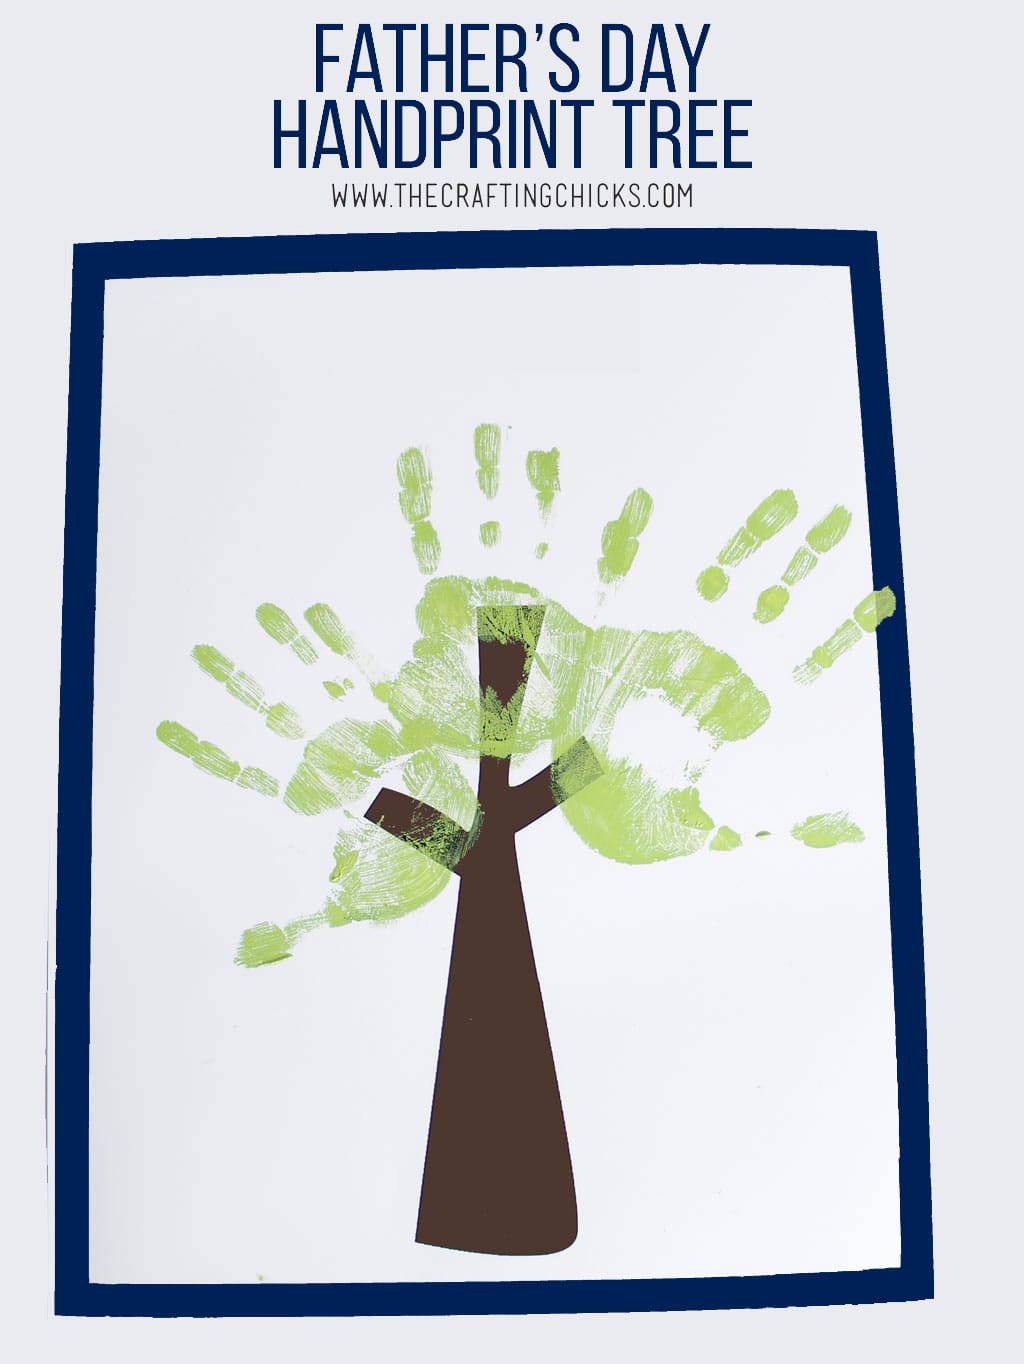 Father's Day Handprint Tree Free Printable for the best Father's Day Gift!